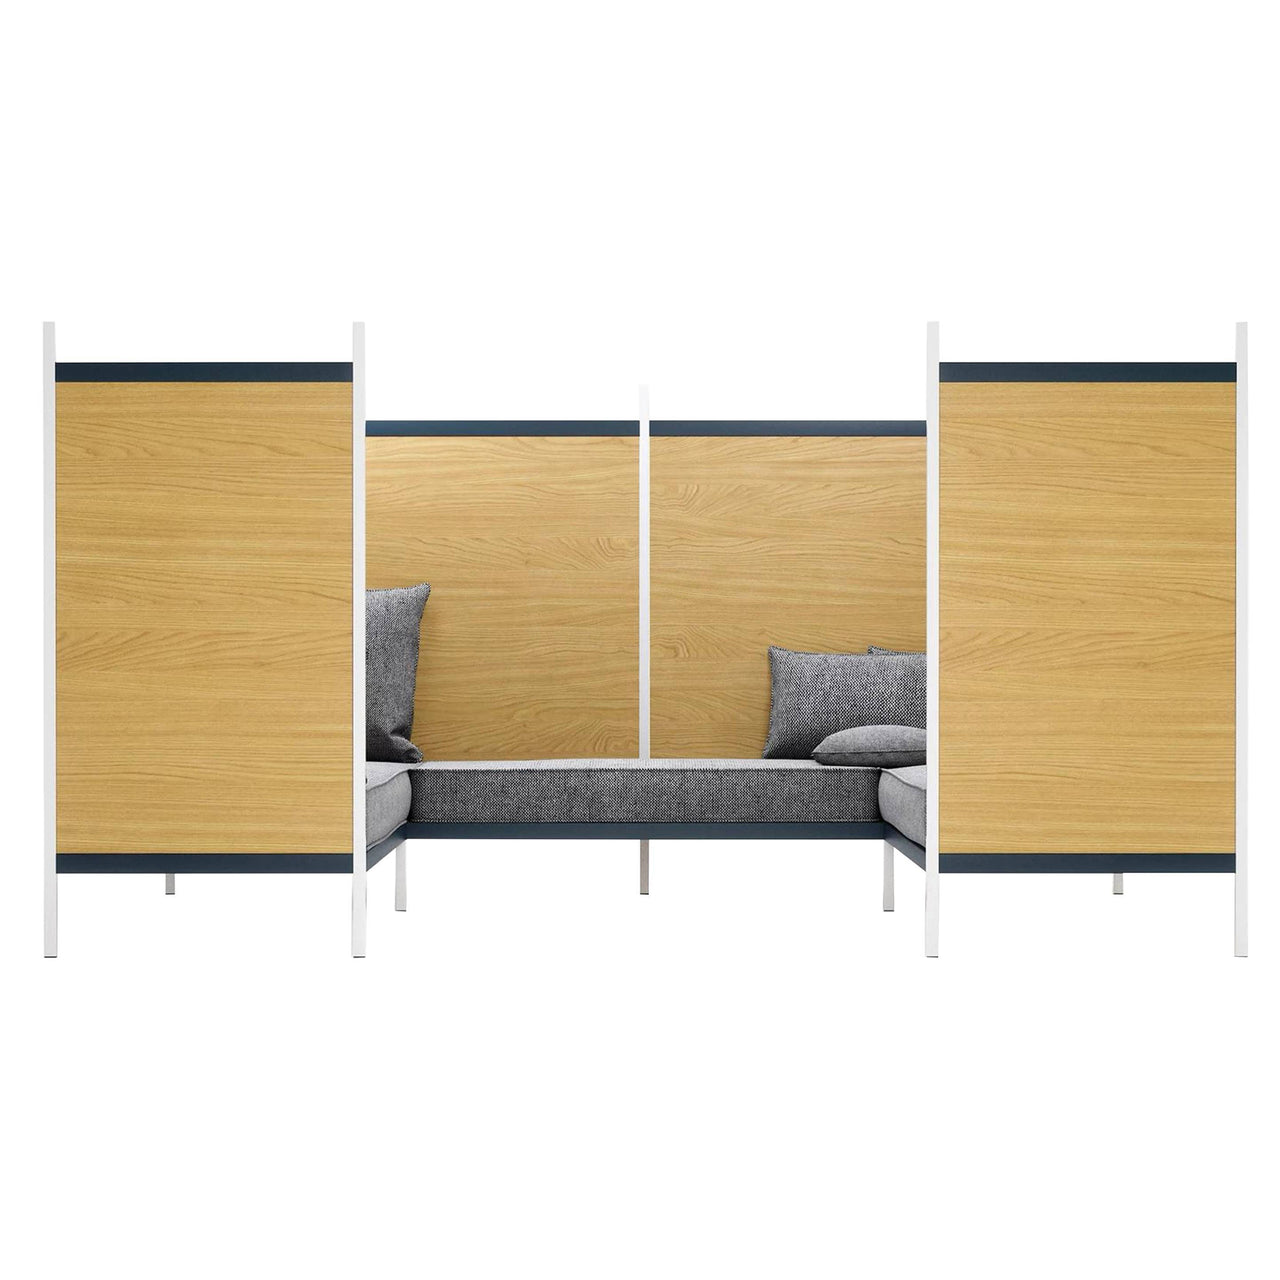 Grid U-Shaped Sofa with Tall Partition: Upholstered + Larch Panel